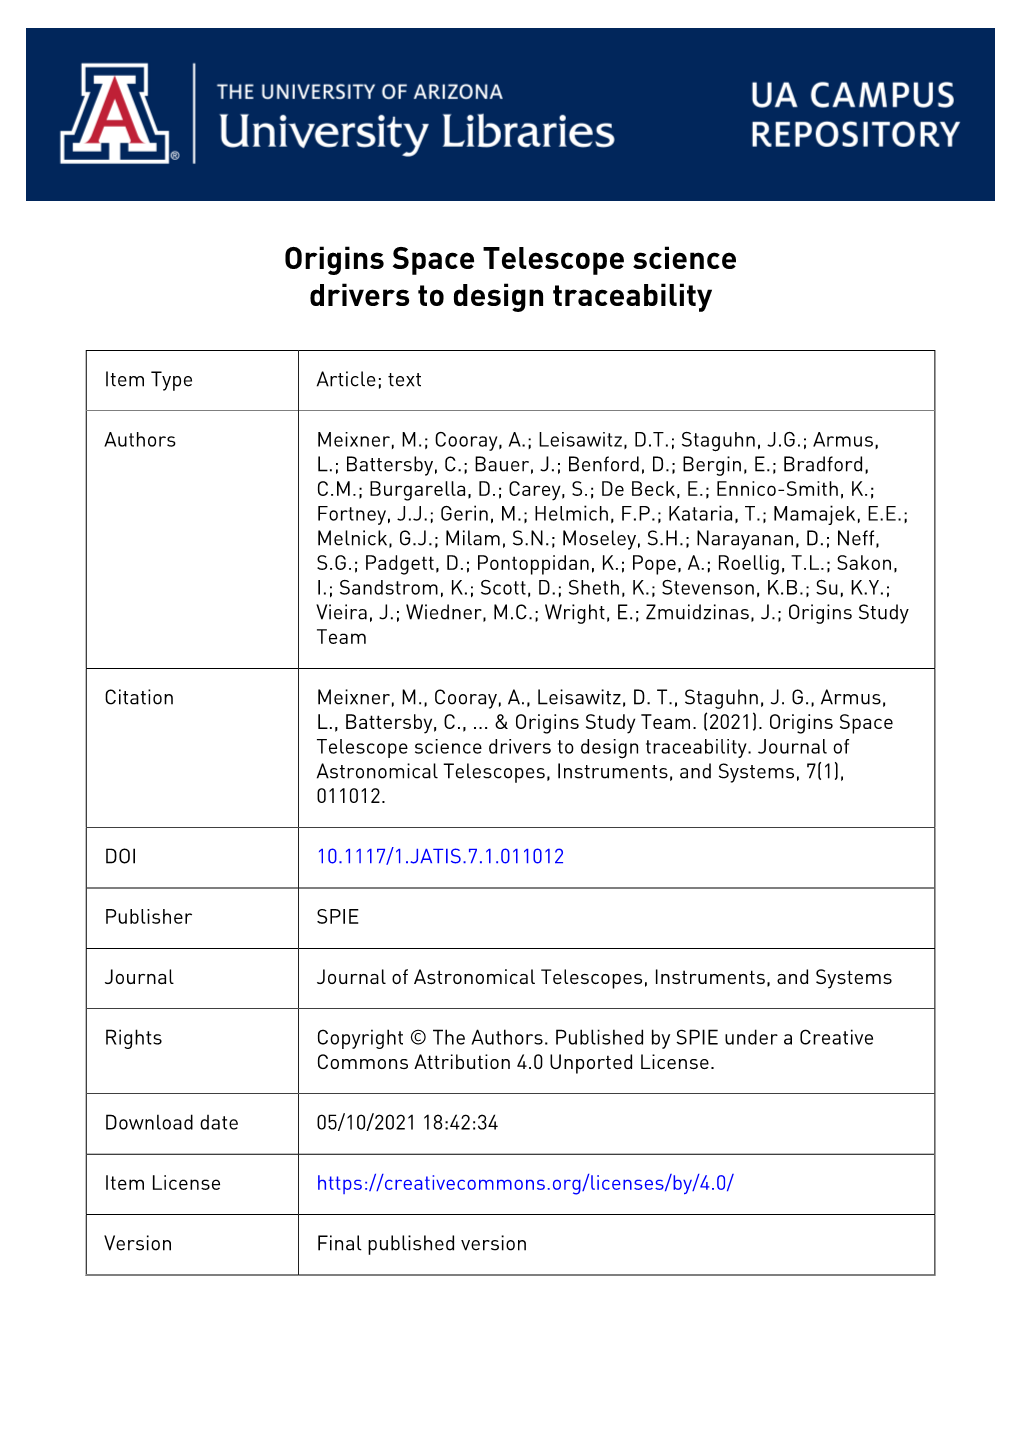 Origins Space Telescope Science Drivers to Design Traceability